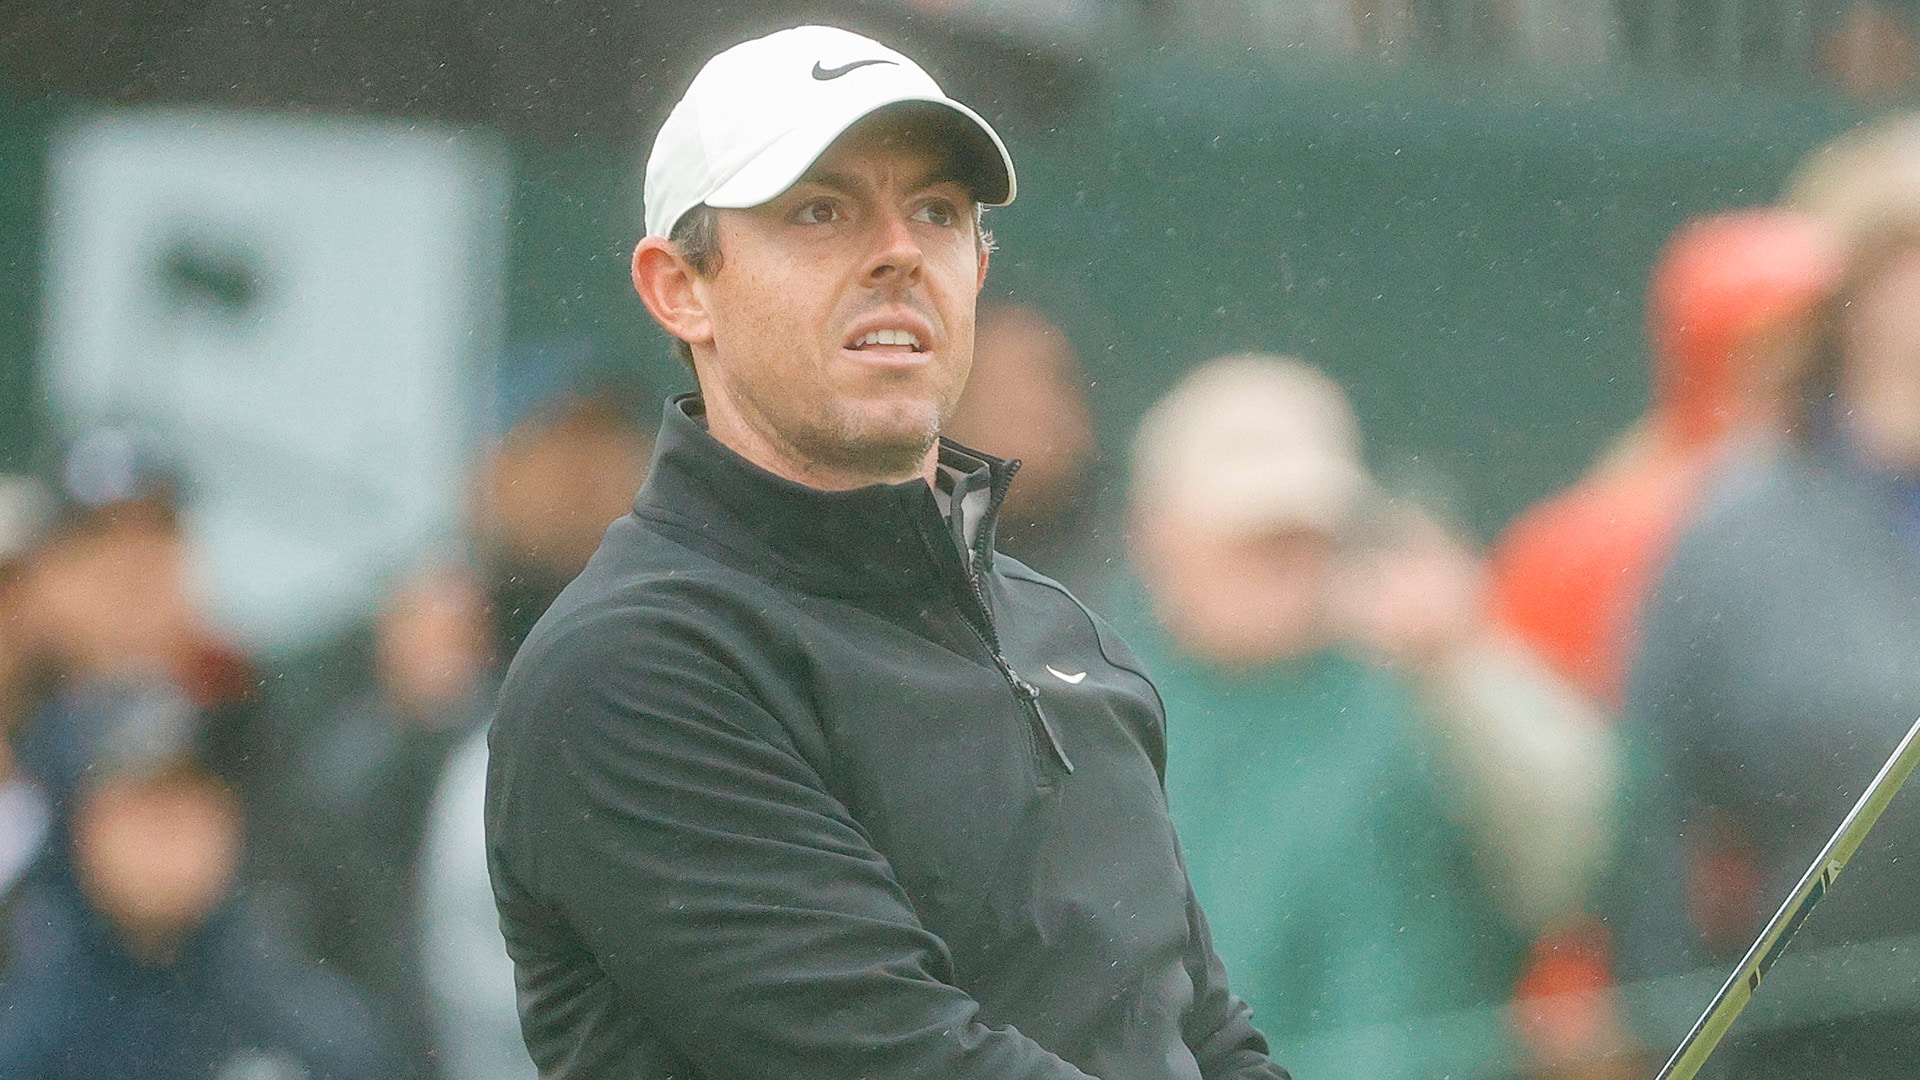 Rory McIlroy rises at Wells Fargo, but what does data say about his chances?